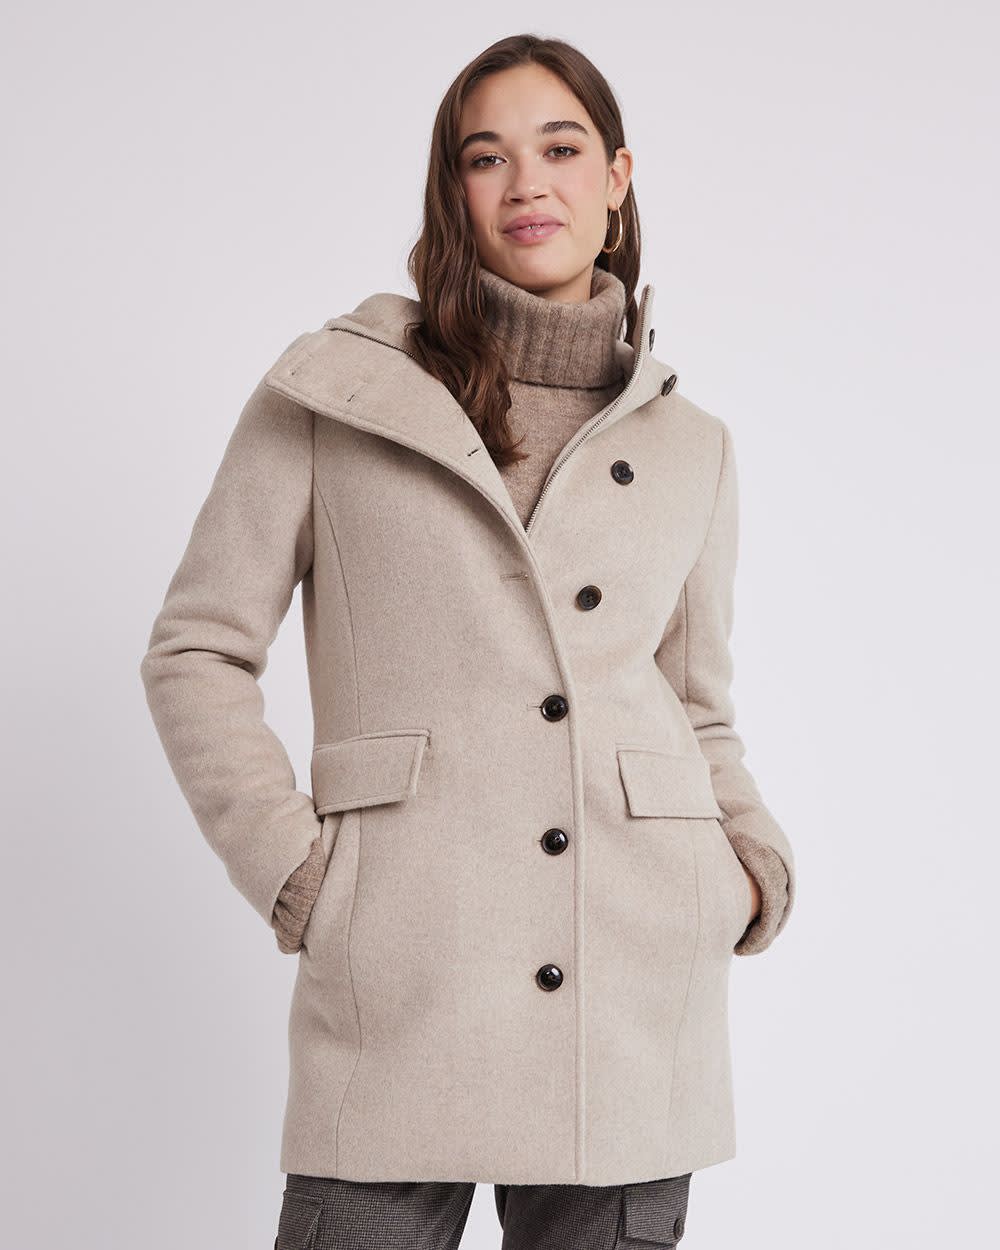 Classic Wool Coat with Hooded High Neckline | RW&CO.